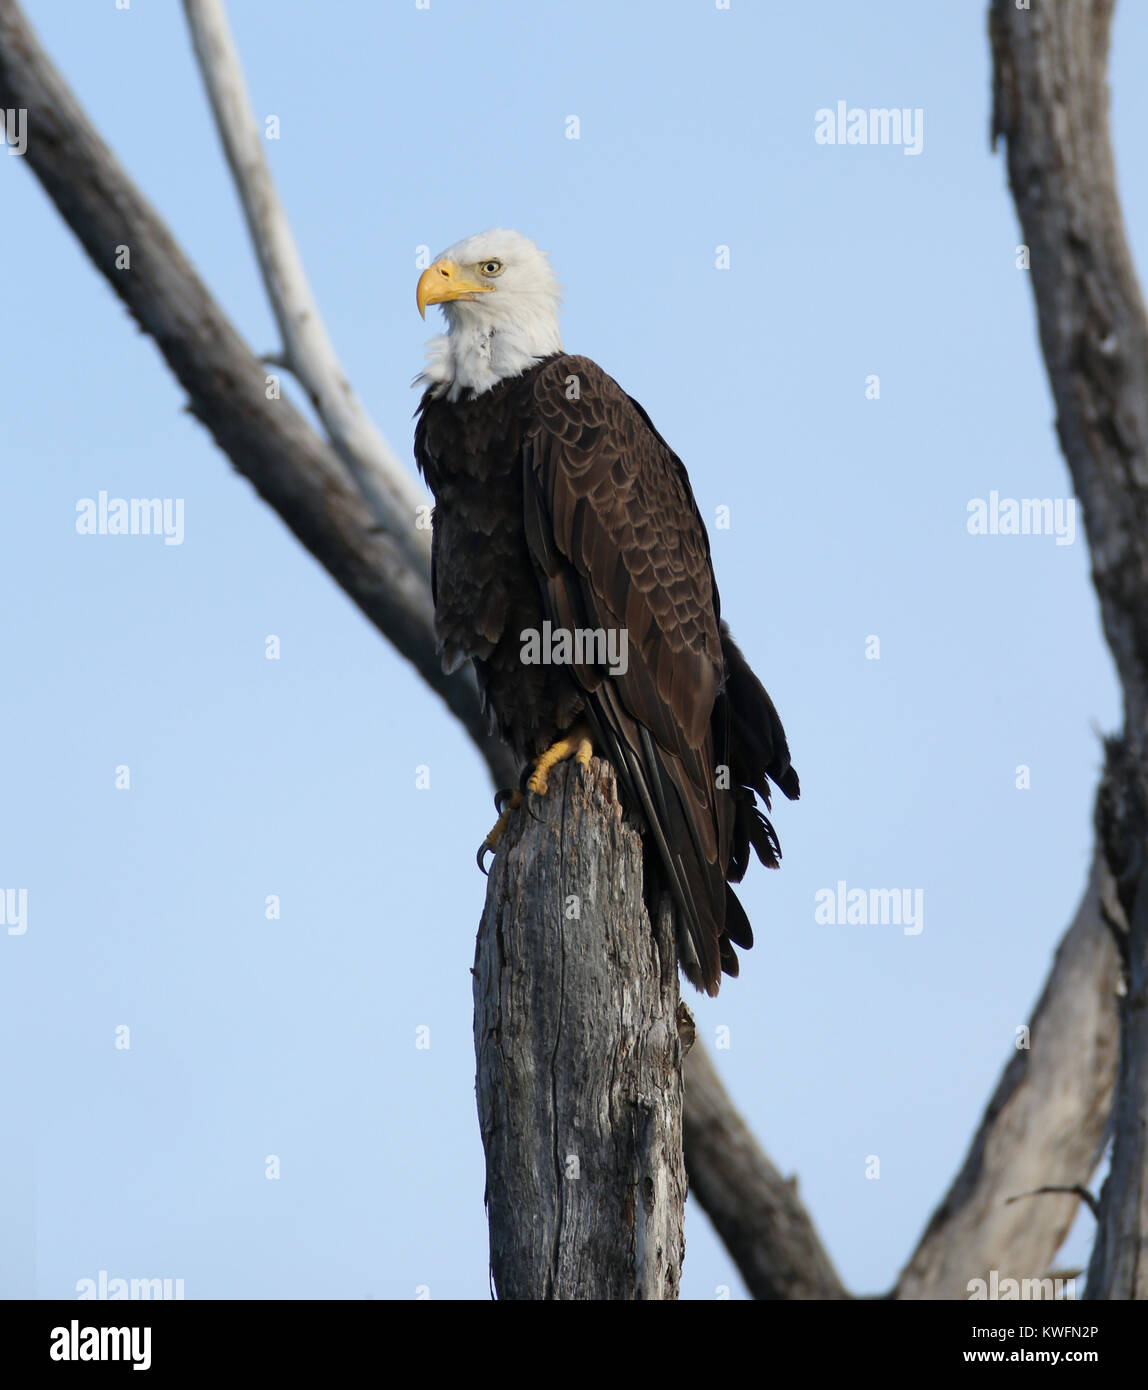 FORT LAUDERDALE, FL - JUNE 01: The bald eagle is both the national bird and national  animal of the United States of America. The bald eagle appears on its Seal. In  the